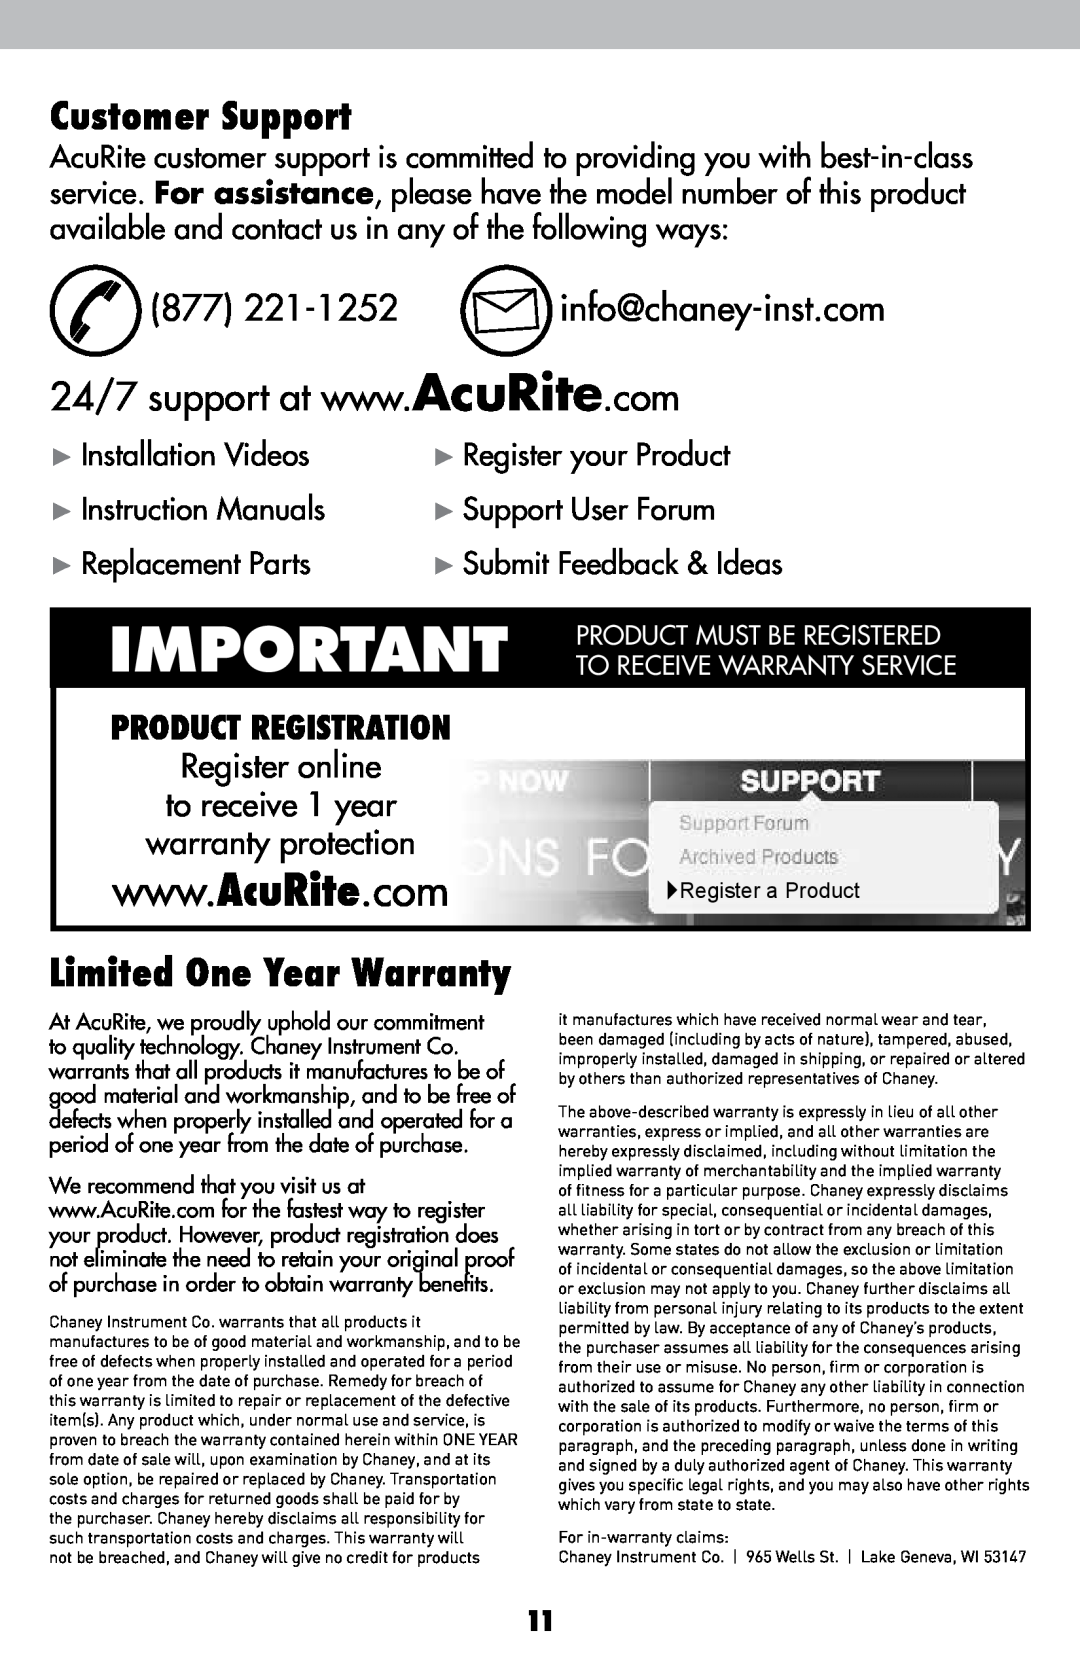 Acu-Rite 06018RM Customer Support, Limited One Year Warranty, 877 221-1252 info@chaney-inst.com, Installation Videos 